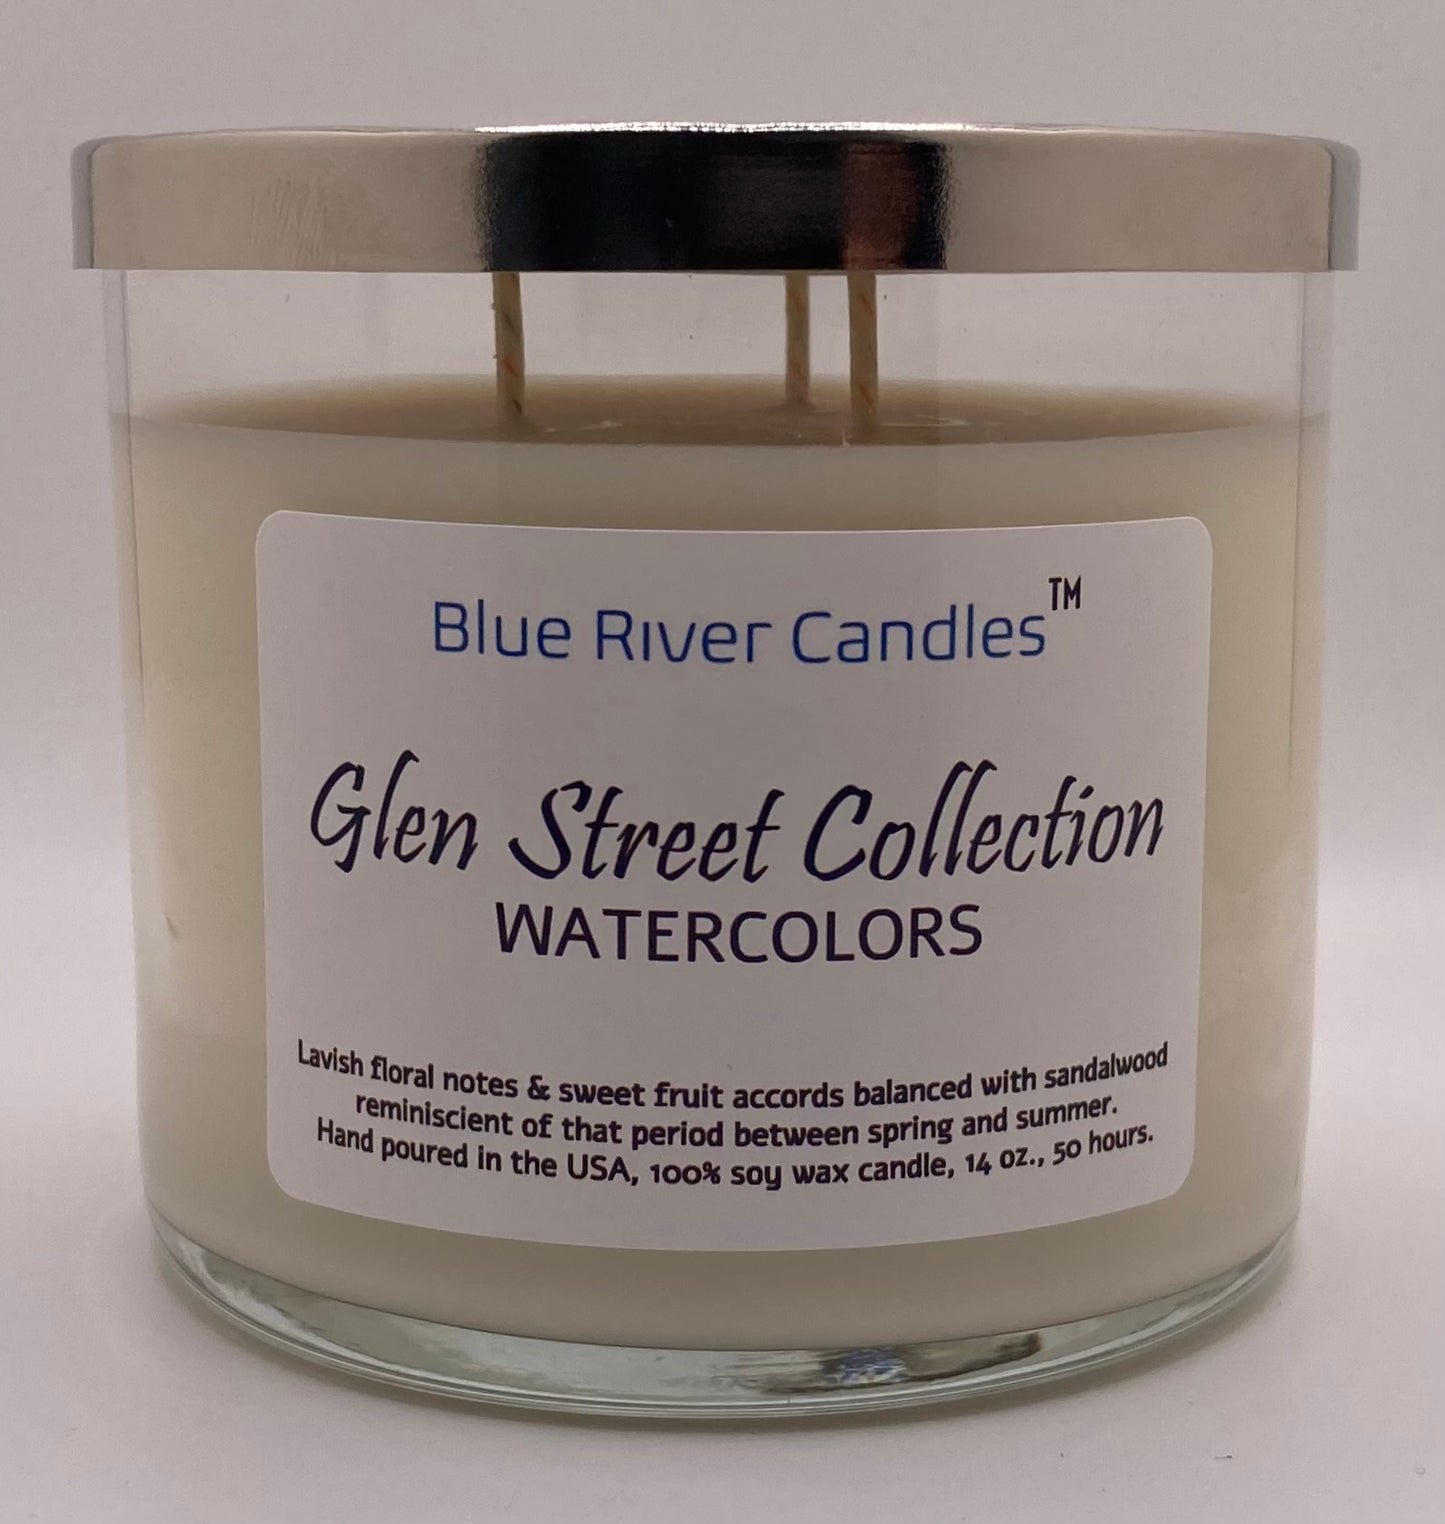 This Glen Street Collection in Watercolors is a blend of lavish floral notes and sweet fruits that that is balanced with sandalwood. The fragrance brings memories of that period between late spring and early summer.